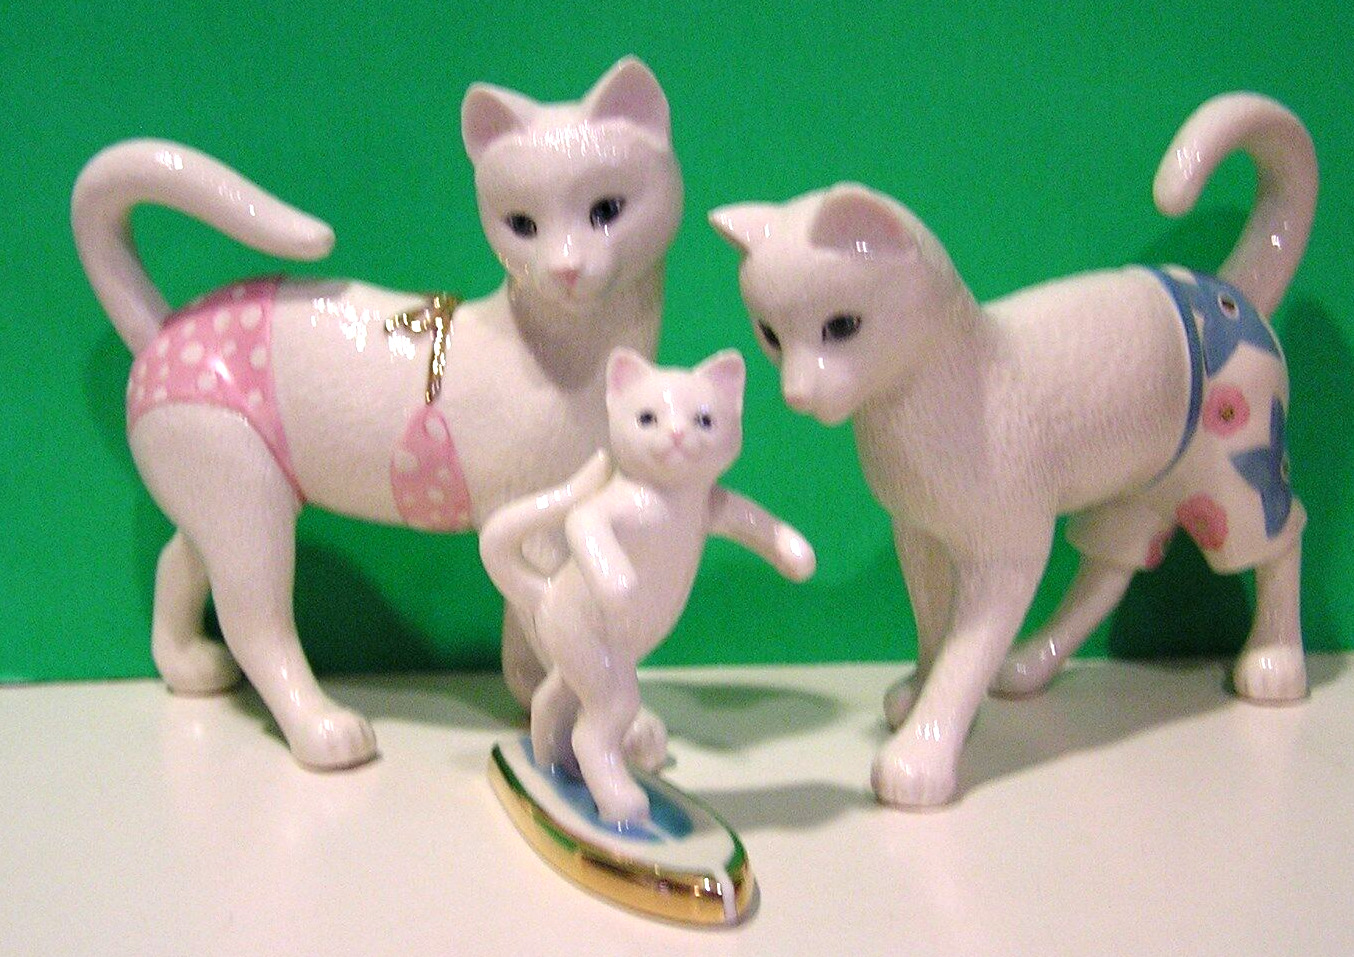 LENOX KITTY\'S SURFING LESSON 3 CAT sculpture set Kitten -- - NEW in BOX with COA